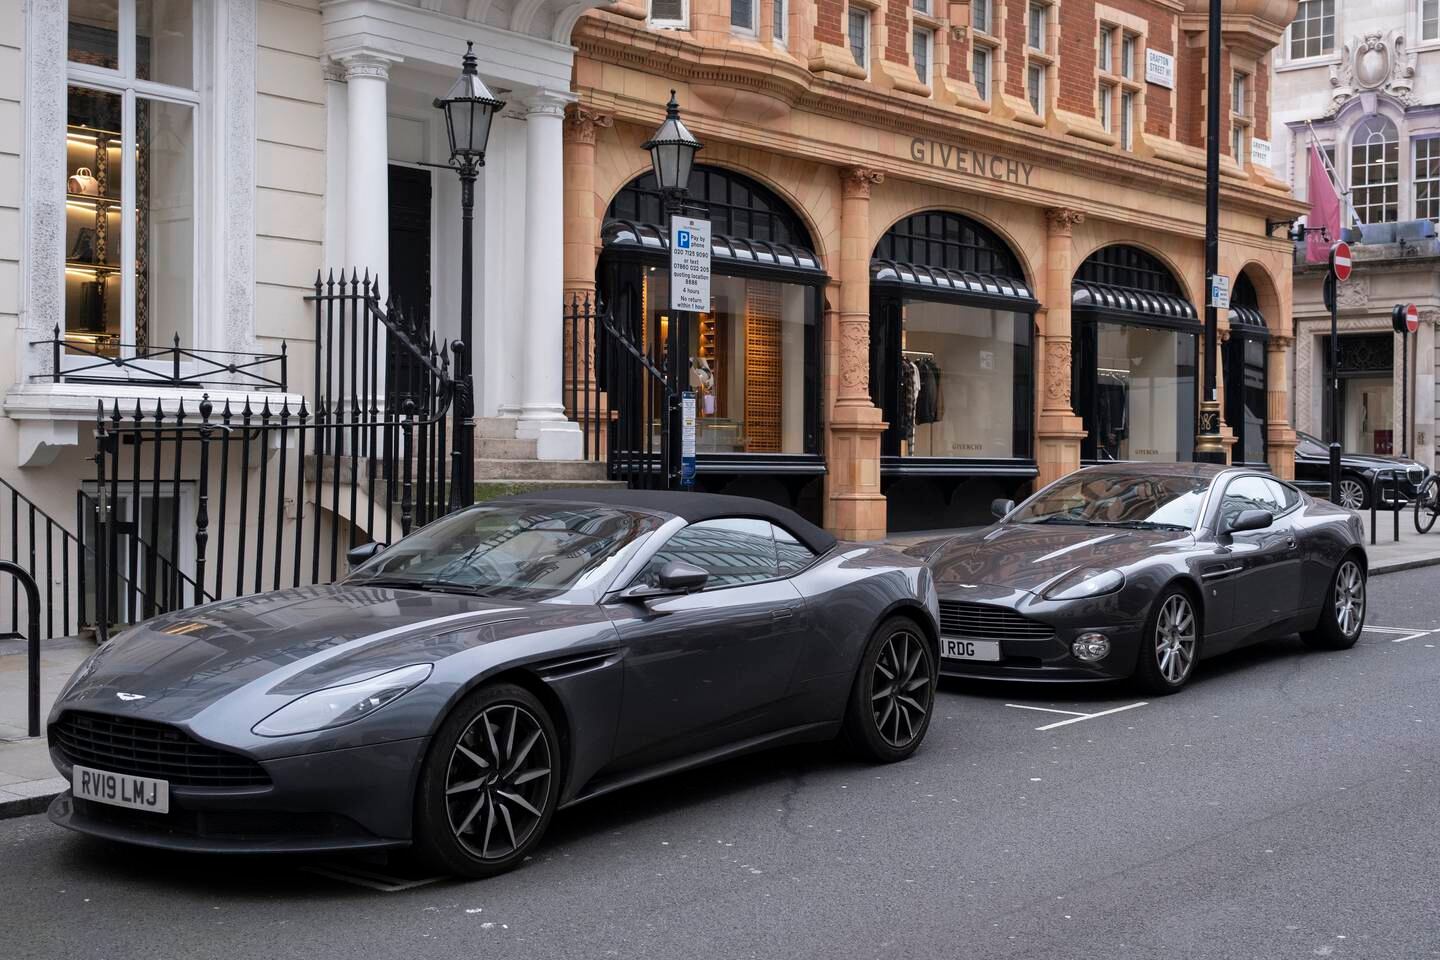 Aston Martin sports cars parked in Mayfair. Getty Images